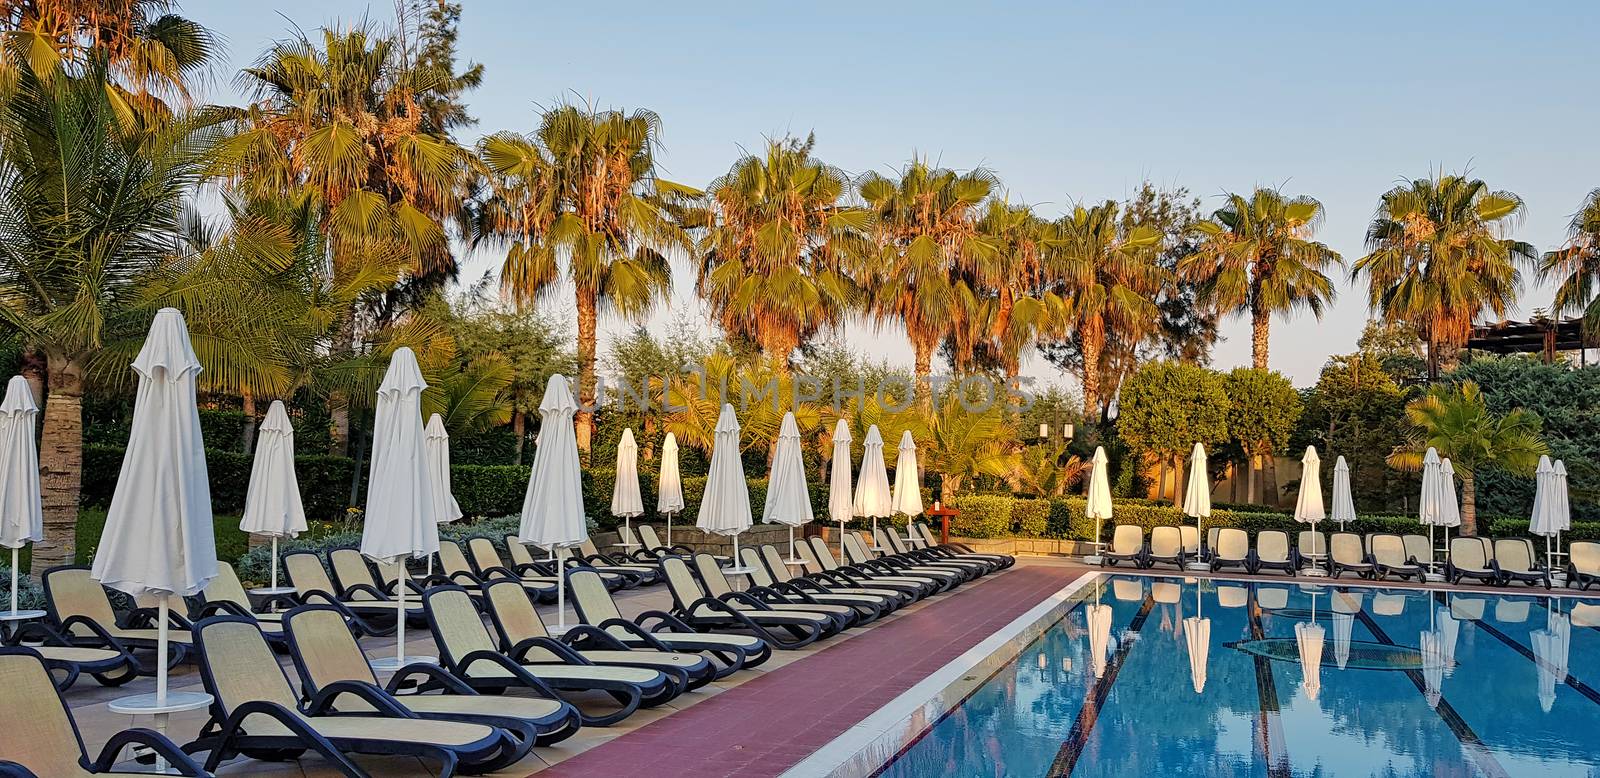 Summer resort on mediterranean beach, swimming pool and chaise loungues with palms behind.